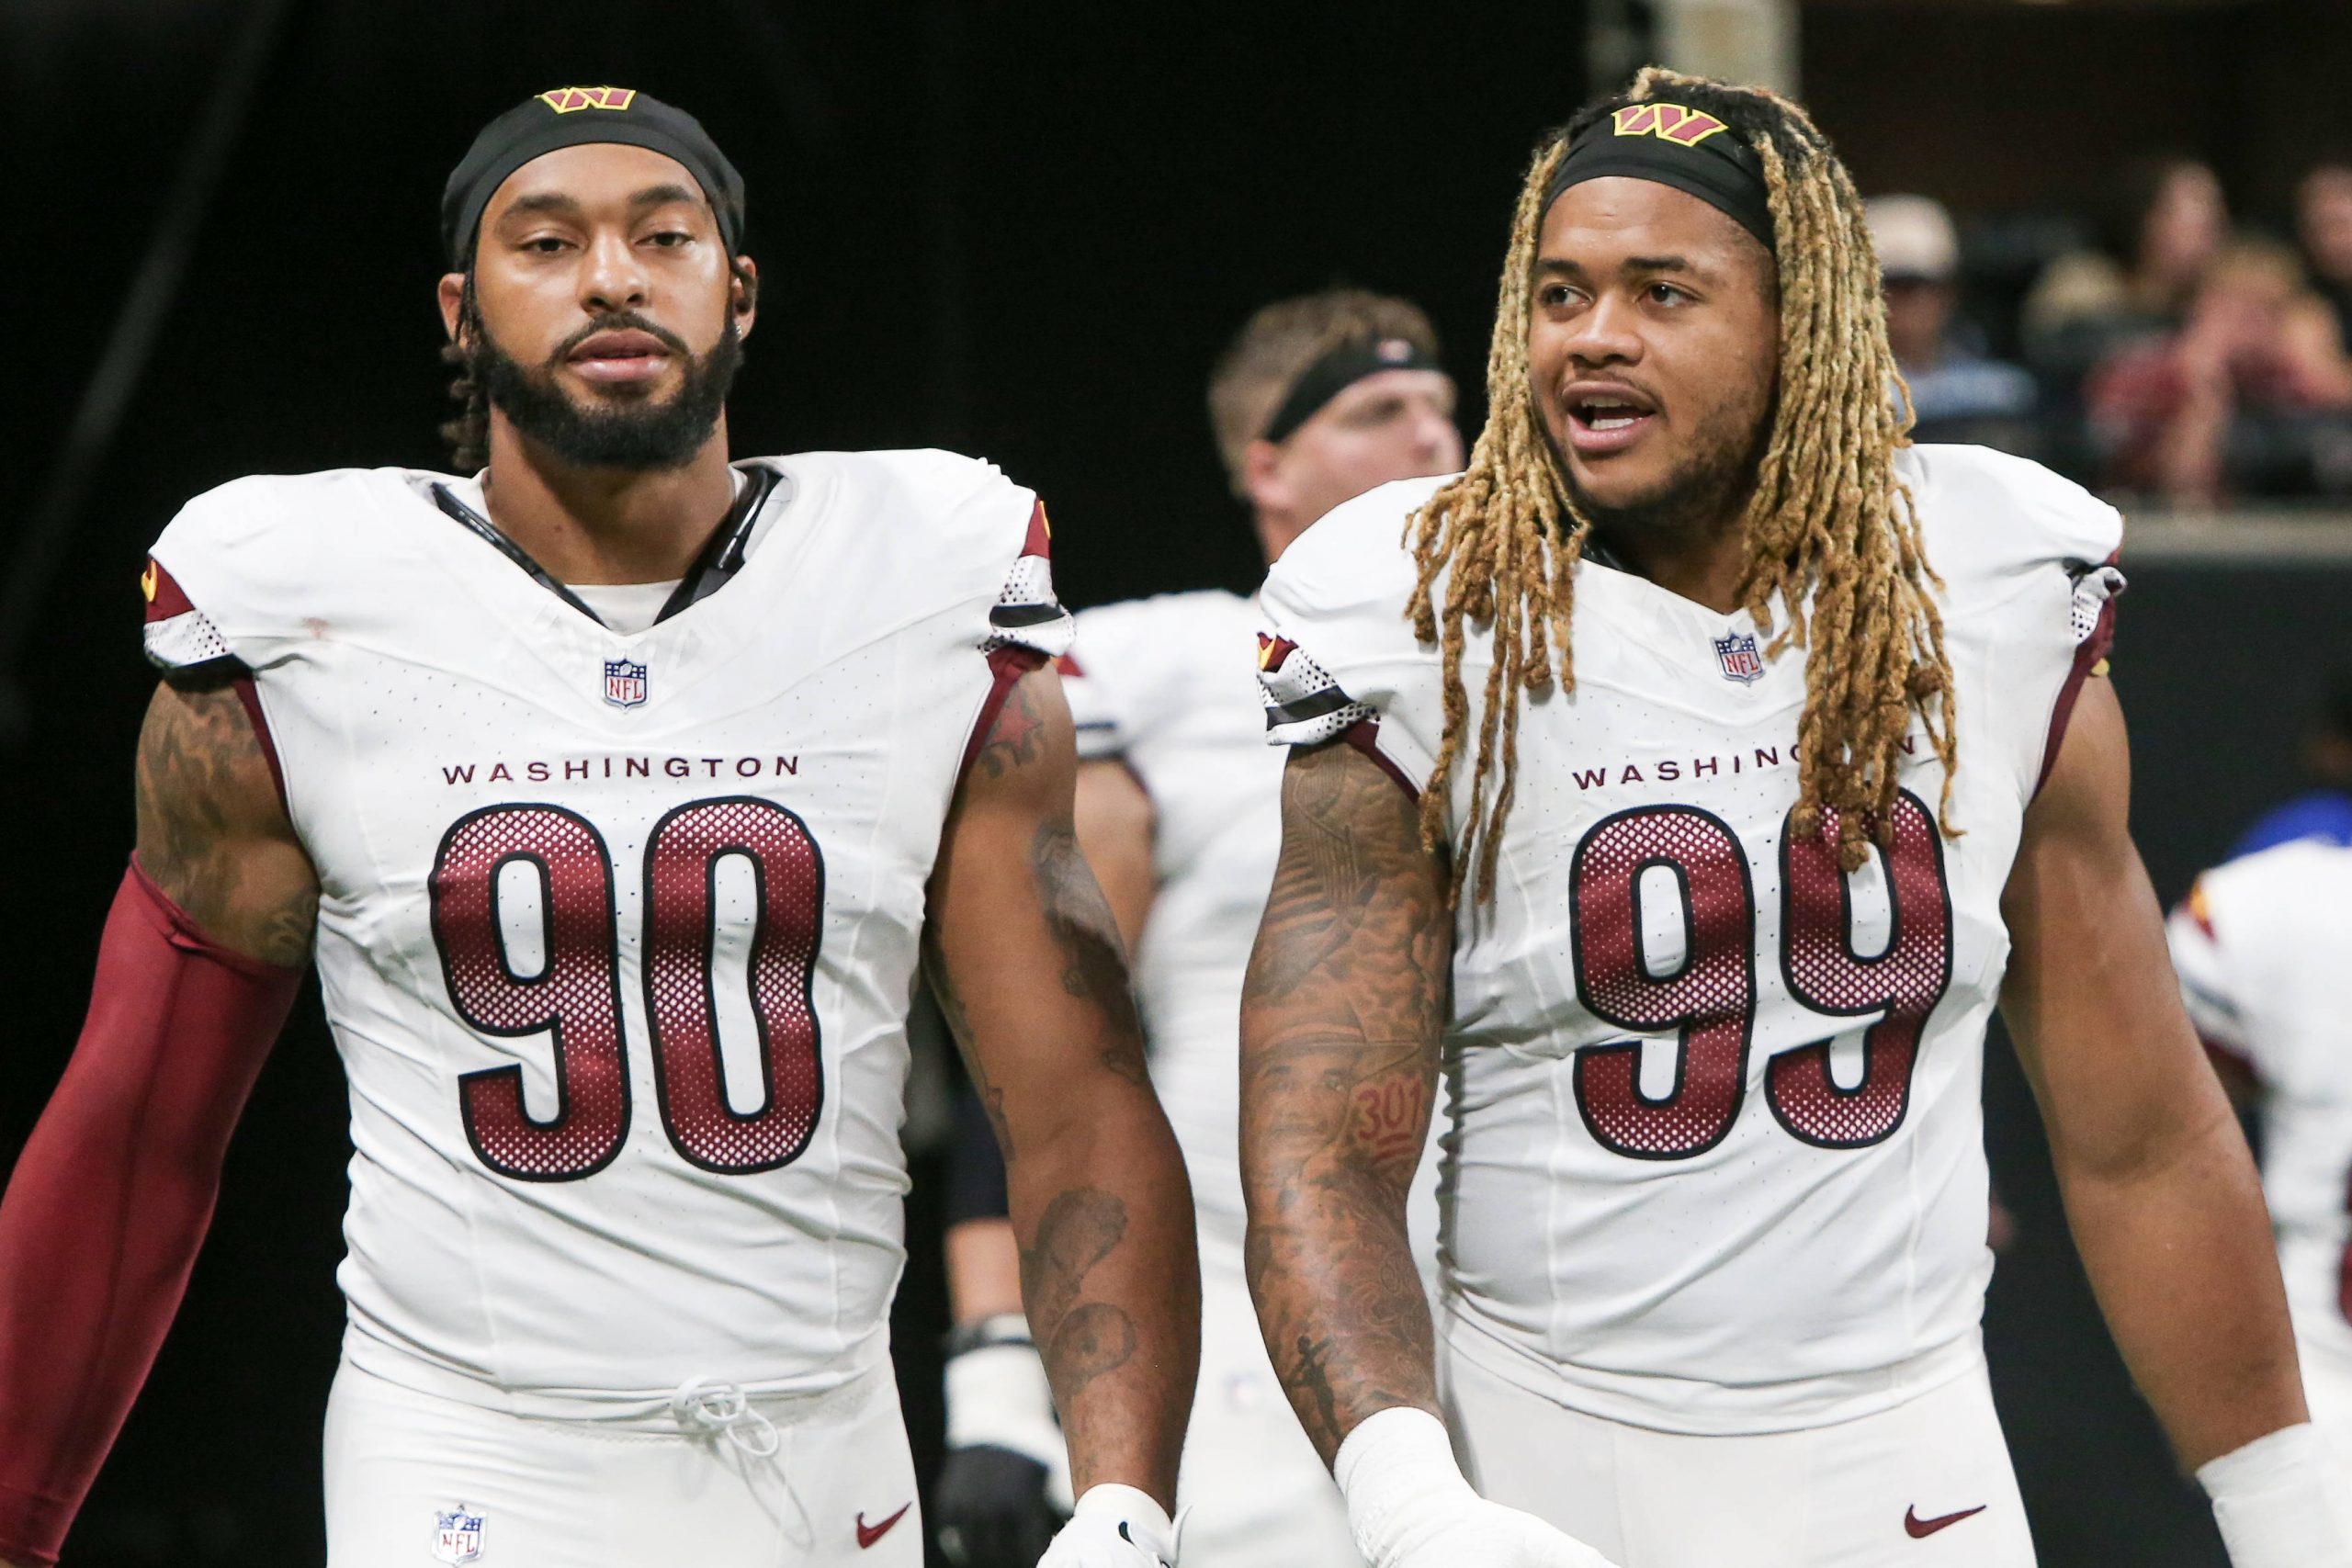 October 15, 2023, Atlanta, Georgia, United States: Washington Commanders defensive ends Montez Sweat 90 and Chase Young 99 enter the field after halftime against the Atlanta Falcons at Mercedes-Benz Stadium. Atlanta United States - ZUMAw109 20231015_fap_w109_017 Copyright: xDebbyxWongx